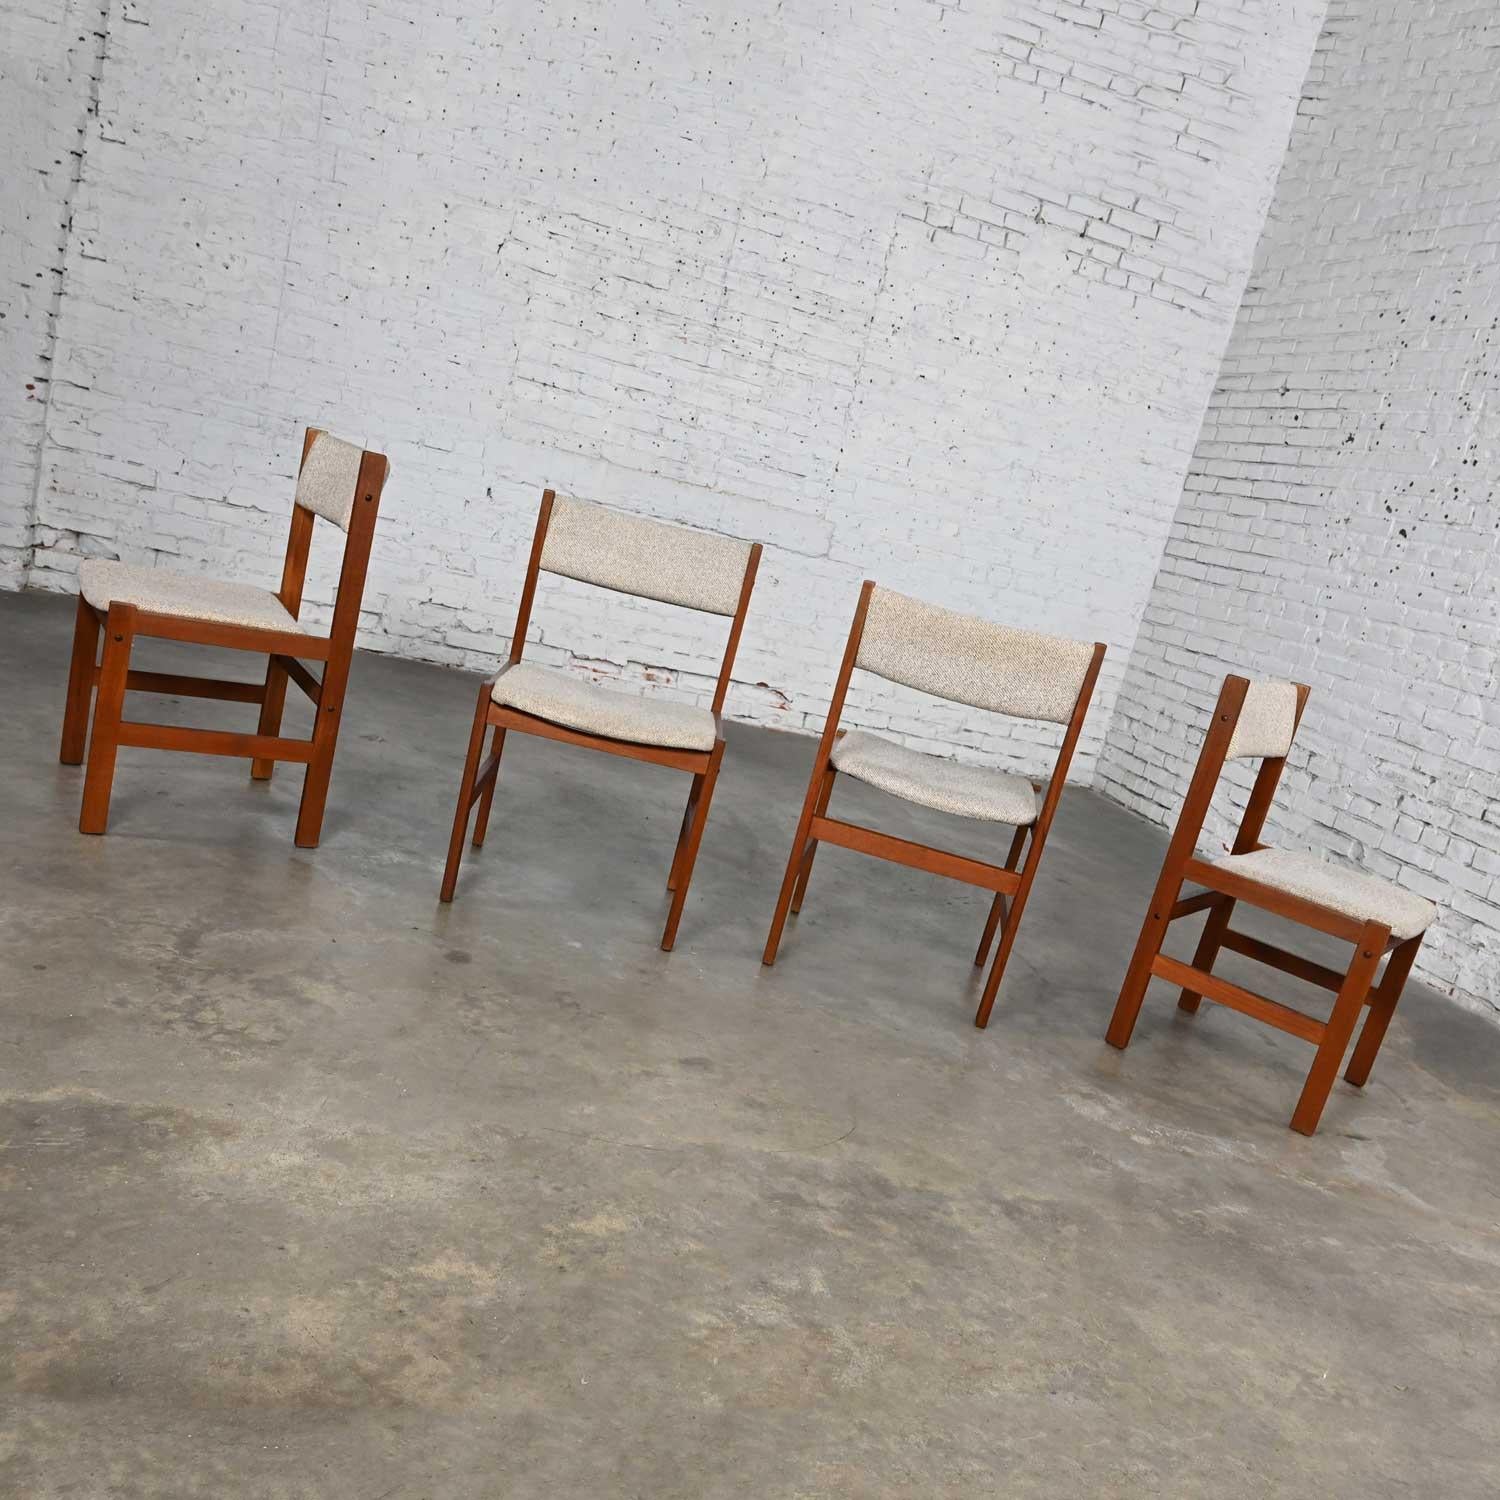 4 Scandinavian Modern Style Sun Furniture Teak & Oatmeal Fabric Dining Chairs In Good Condition For Sale In Topeka, KS